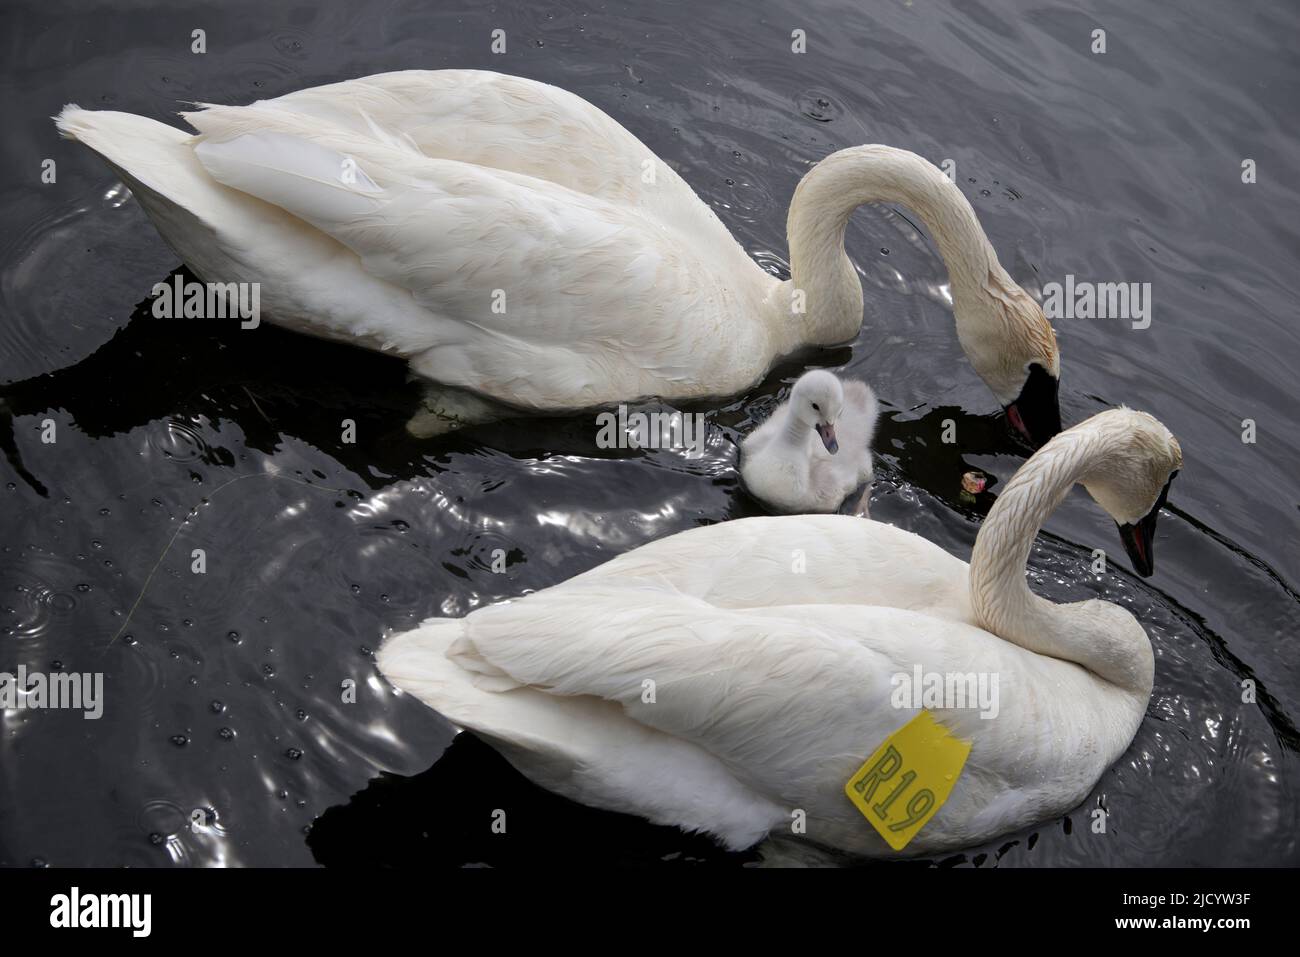 Baby swan under the protection of the parent Stock Photo